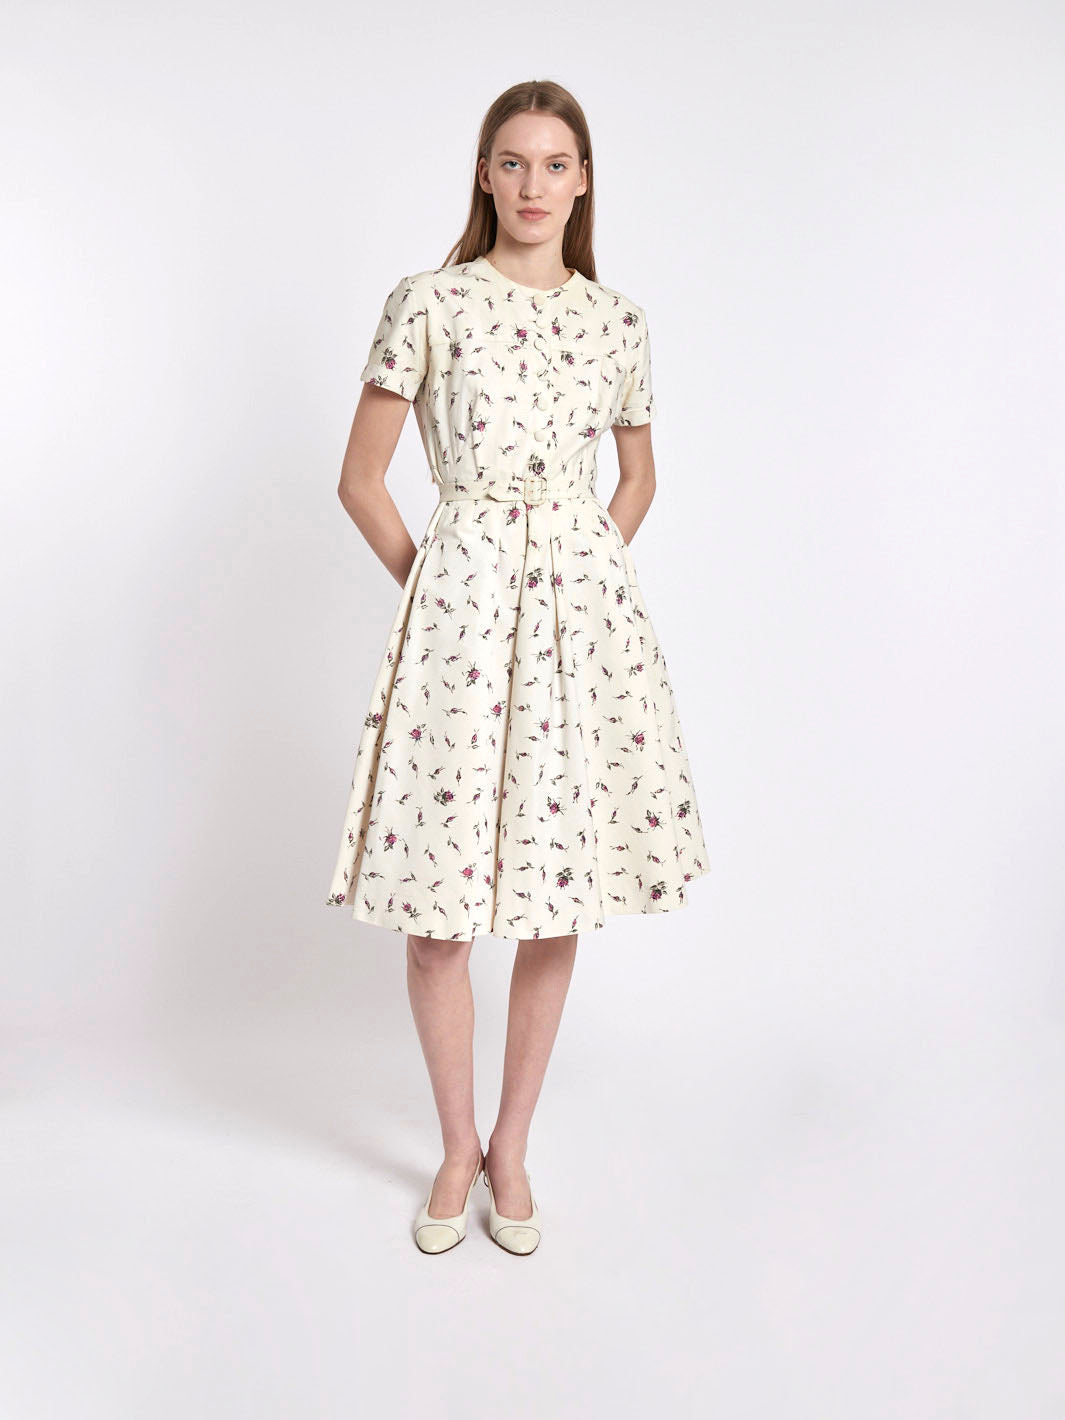 1950s dress in cream coloured cotton with drawings of wild roses